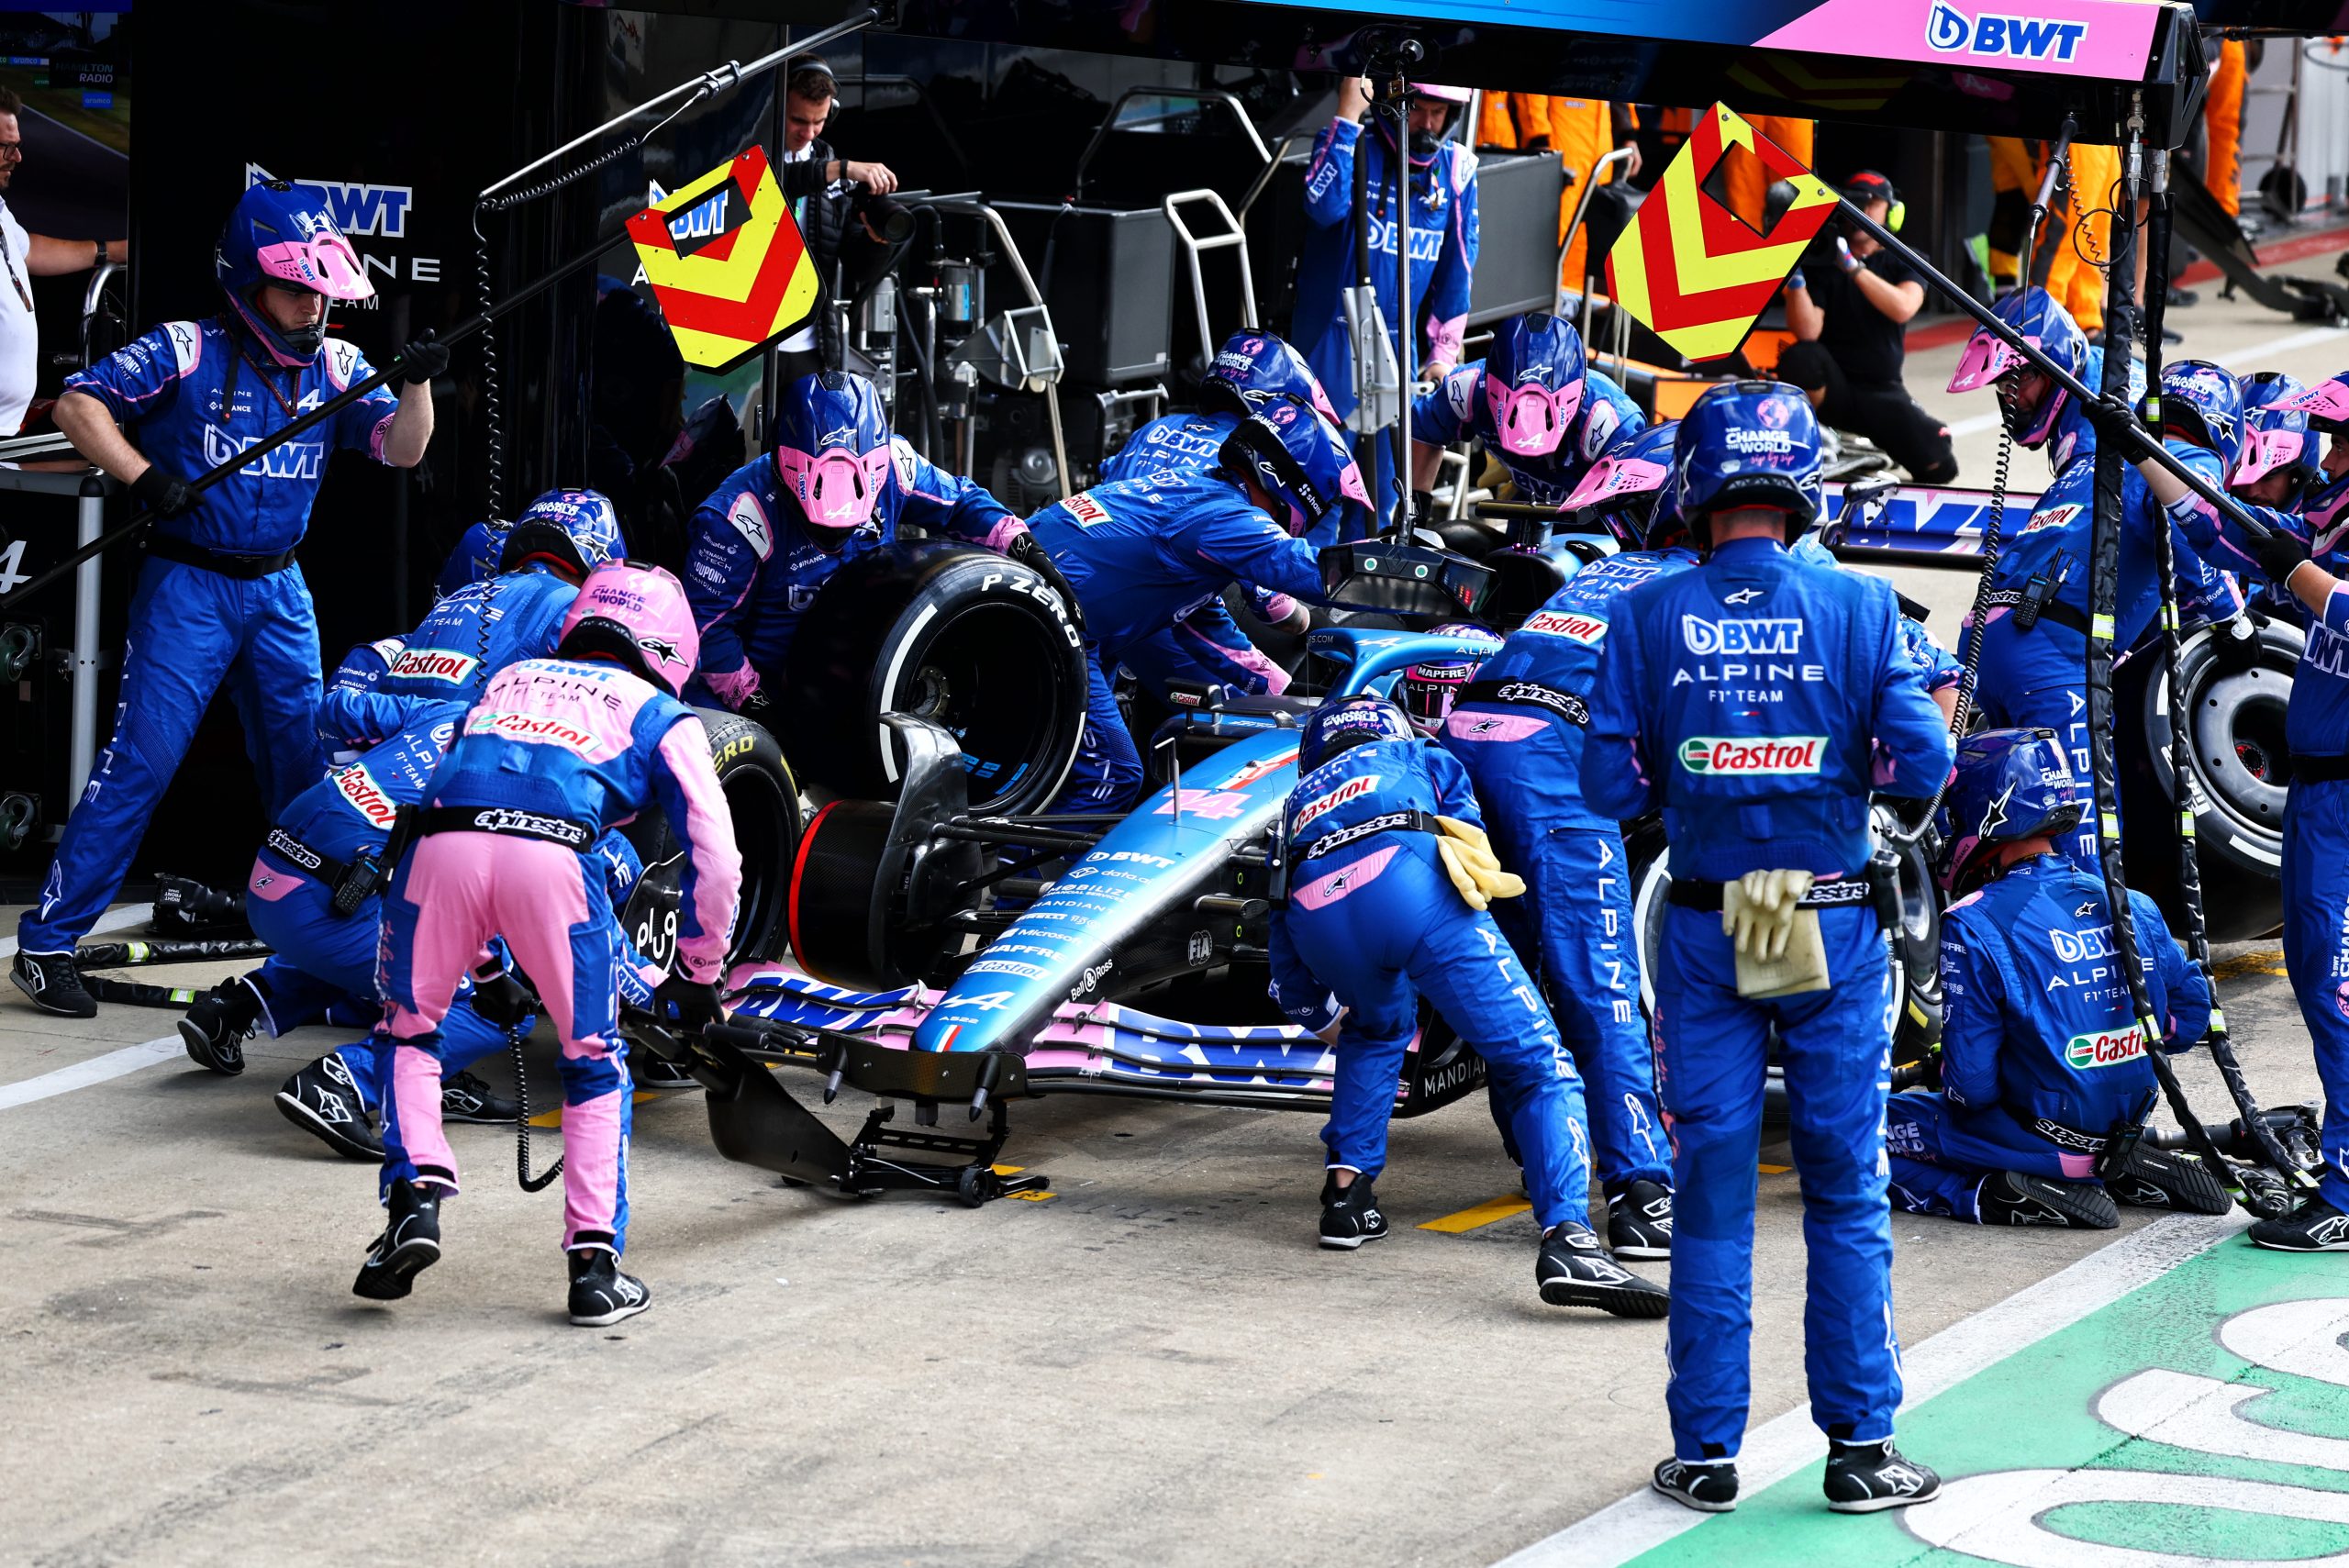 Alpine pit crew members in blue jumpsuits attend to Fernando Alonso's car during a pit stop, including changing the car's tires. 